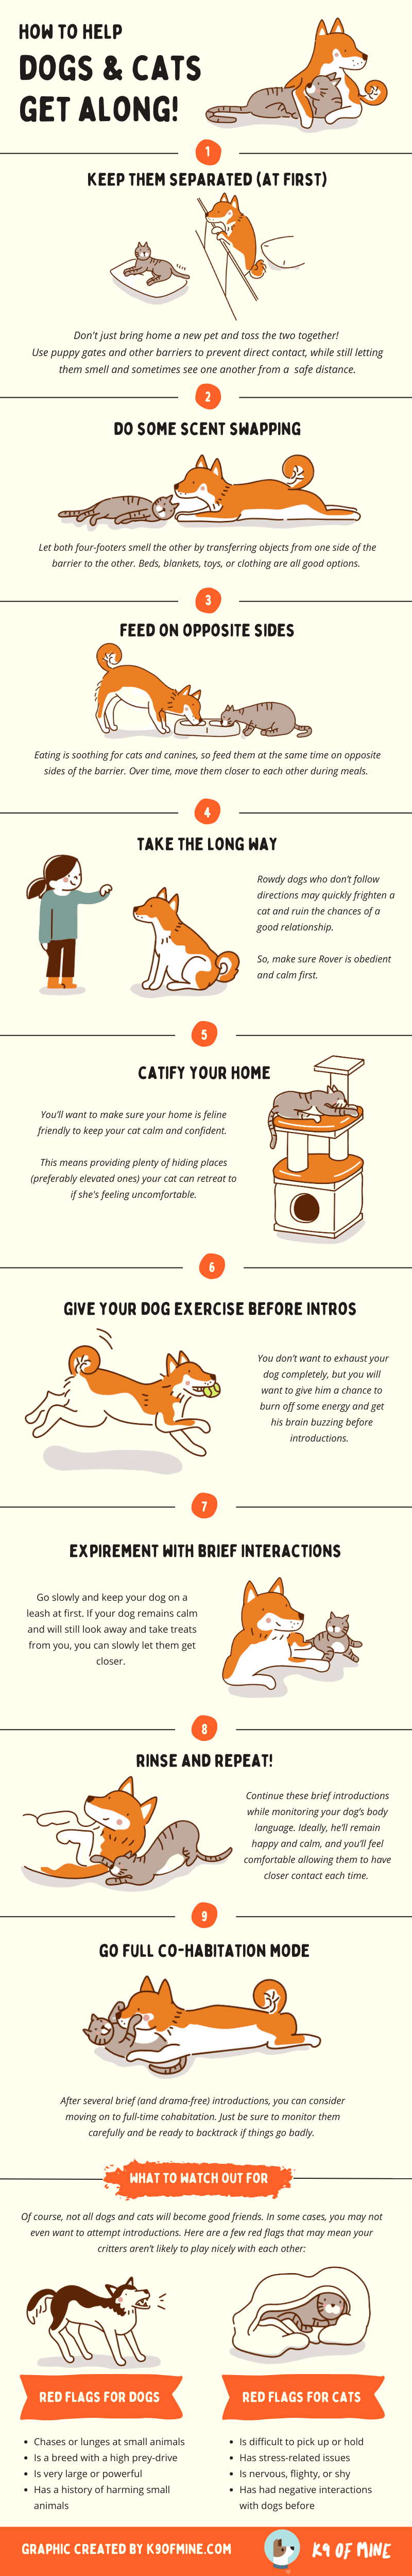 dogs and cats infographic